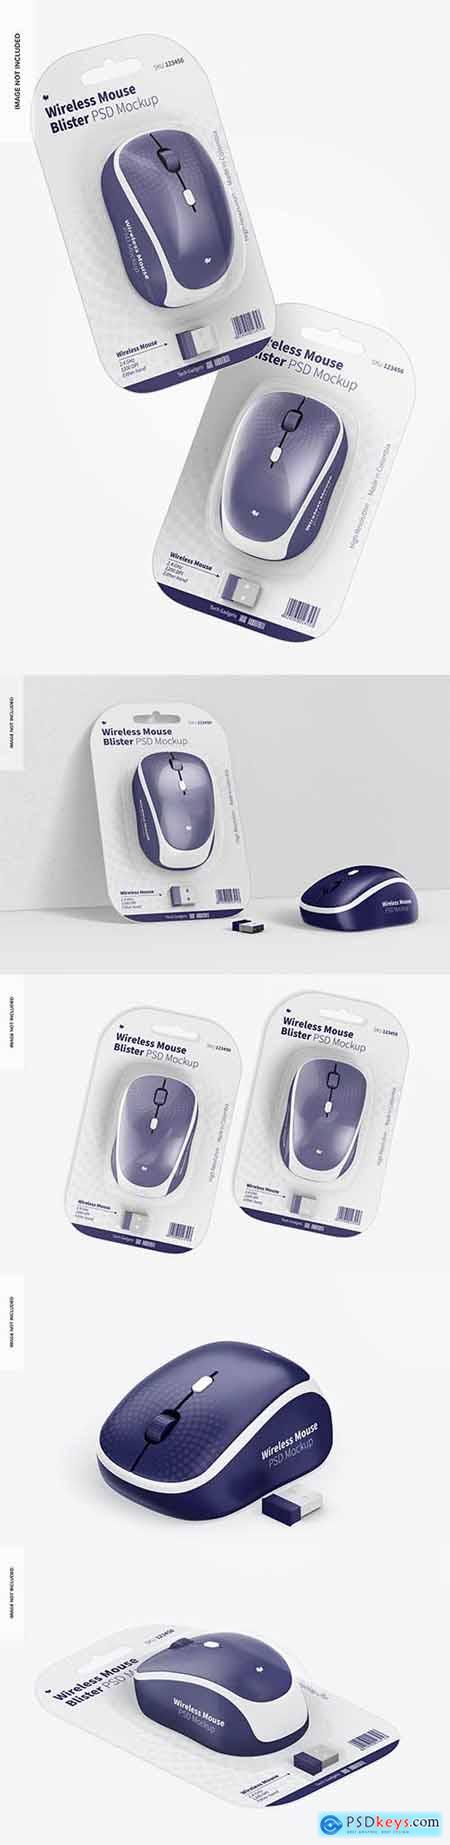 Wireless mouse blisters mockup